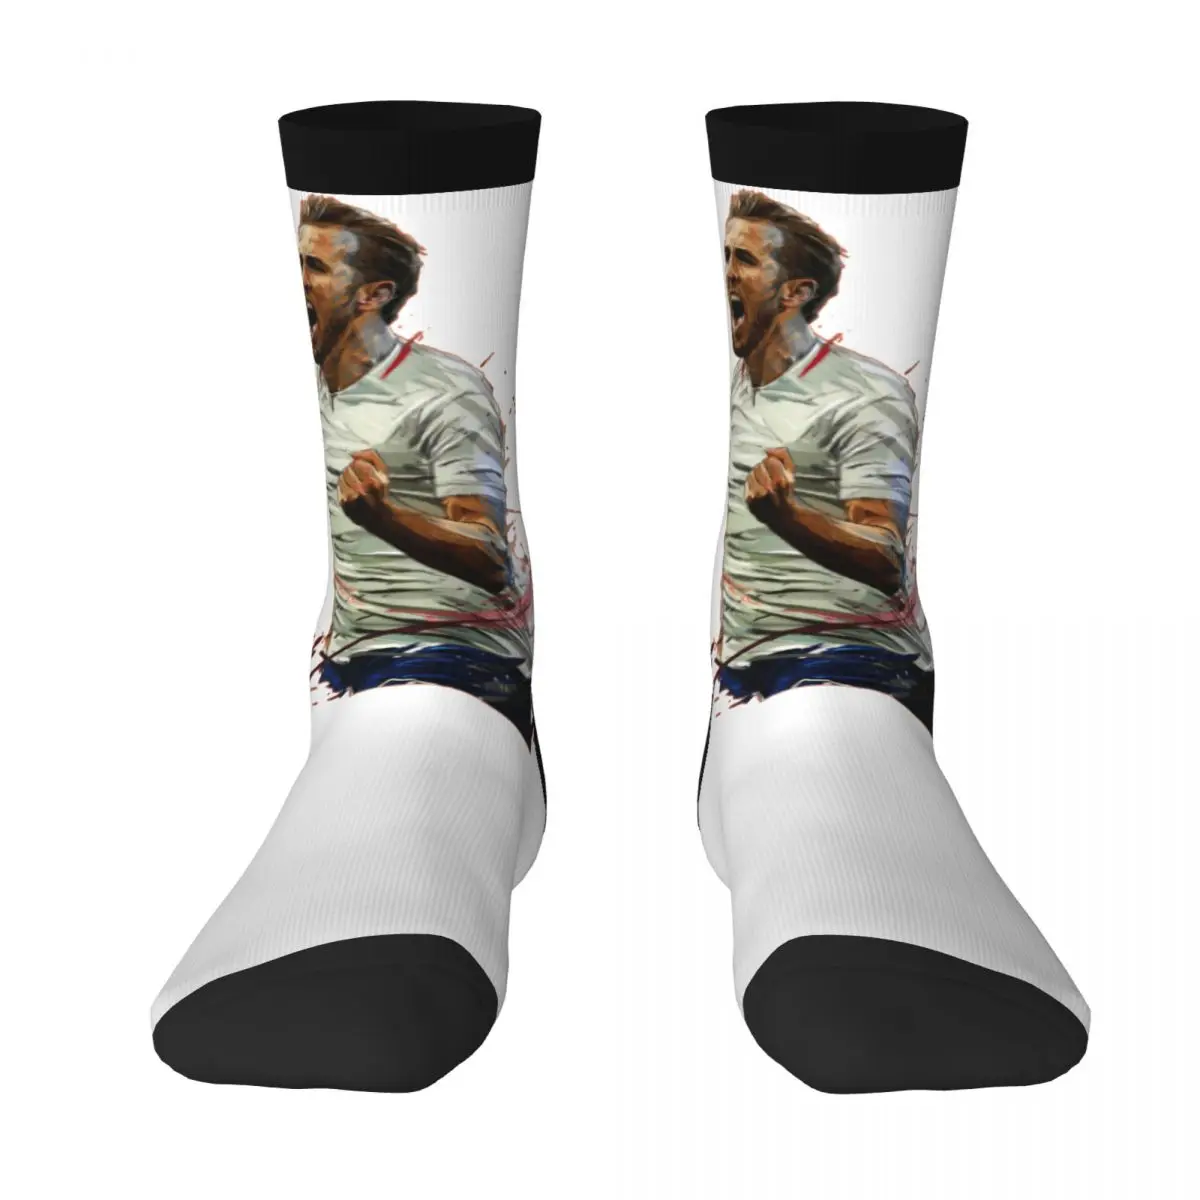 

England Harryss And Kaness 1 Color contrast socks Field pack Compression Socks Graphic Funny Graphic Football Team Stocking